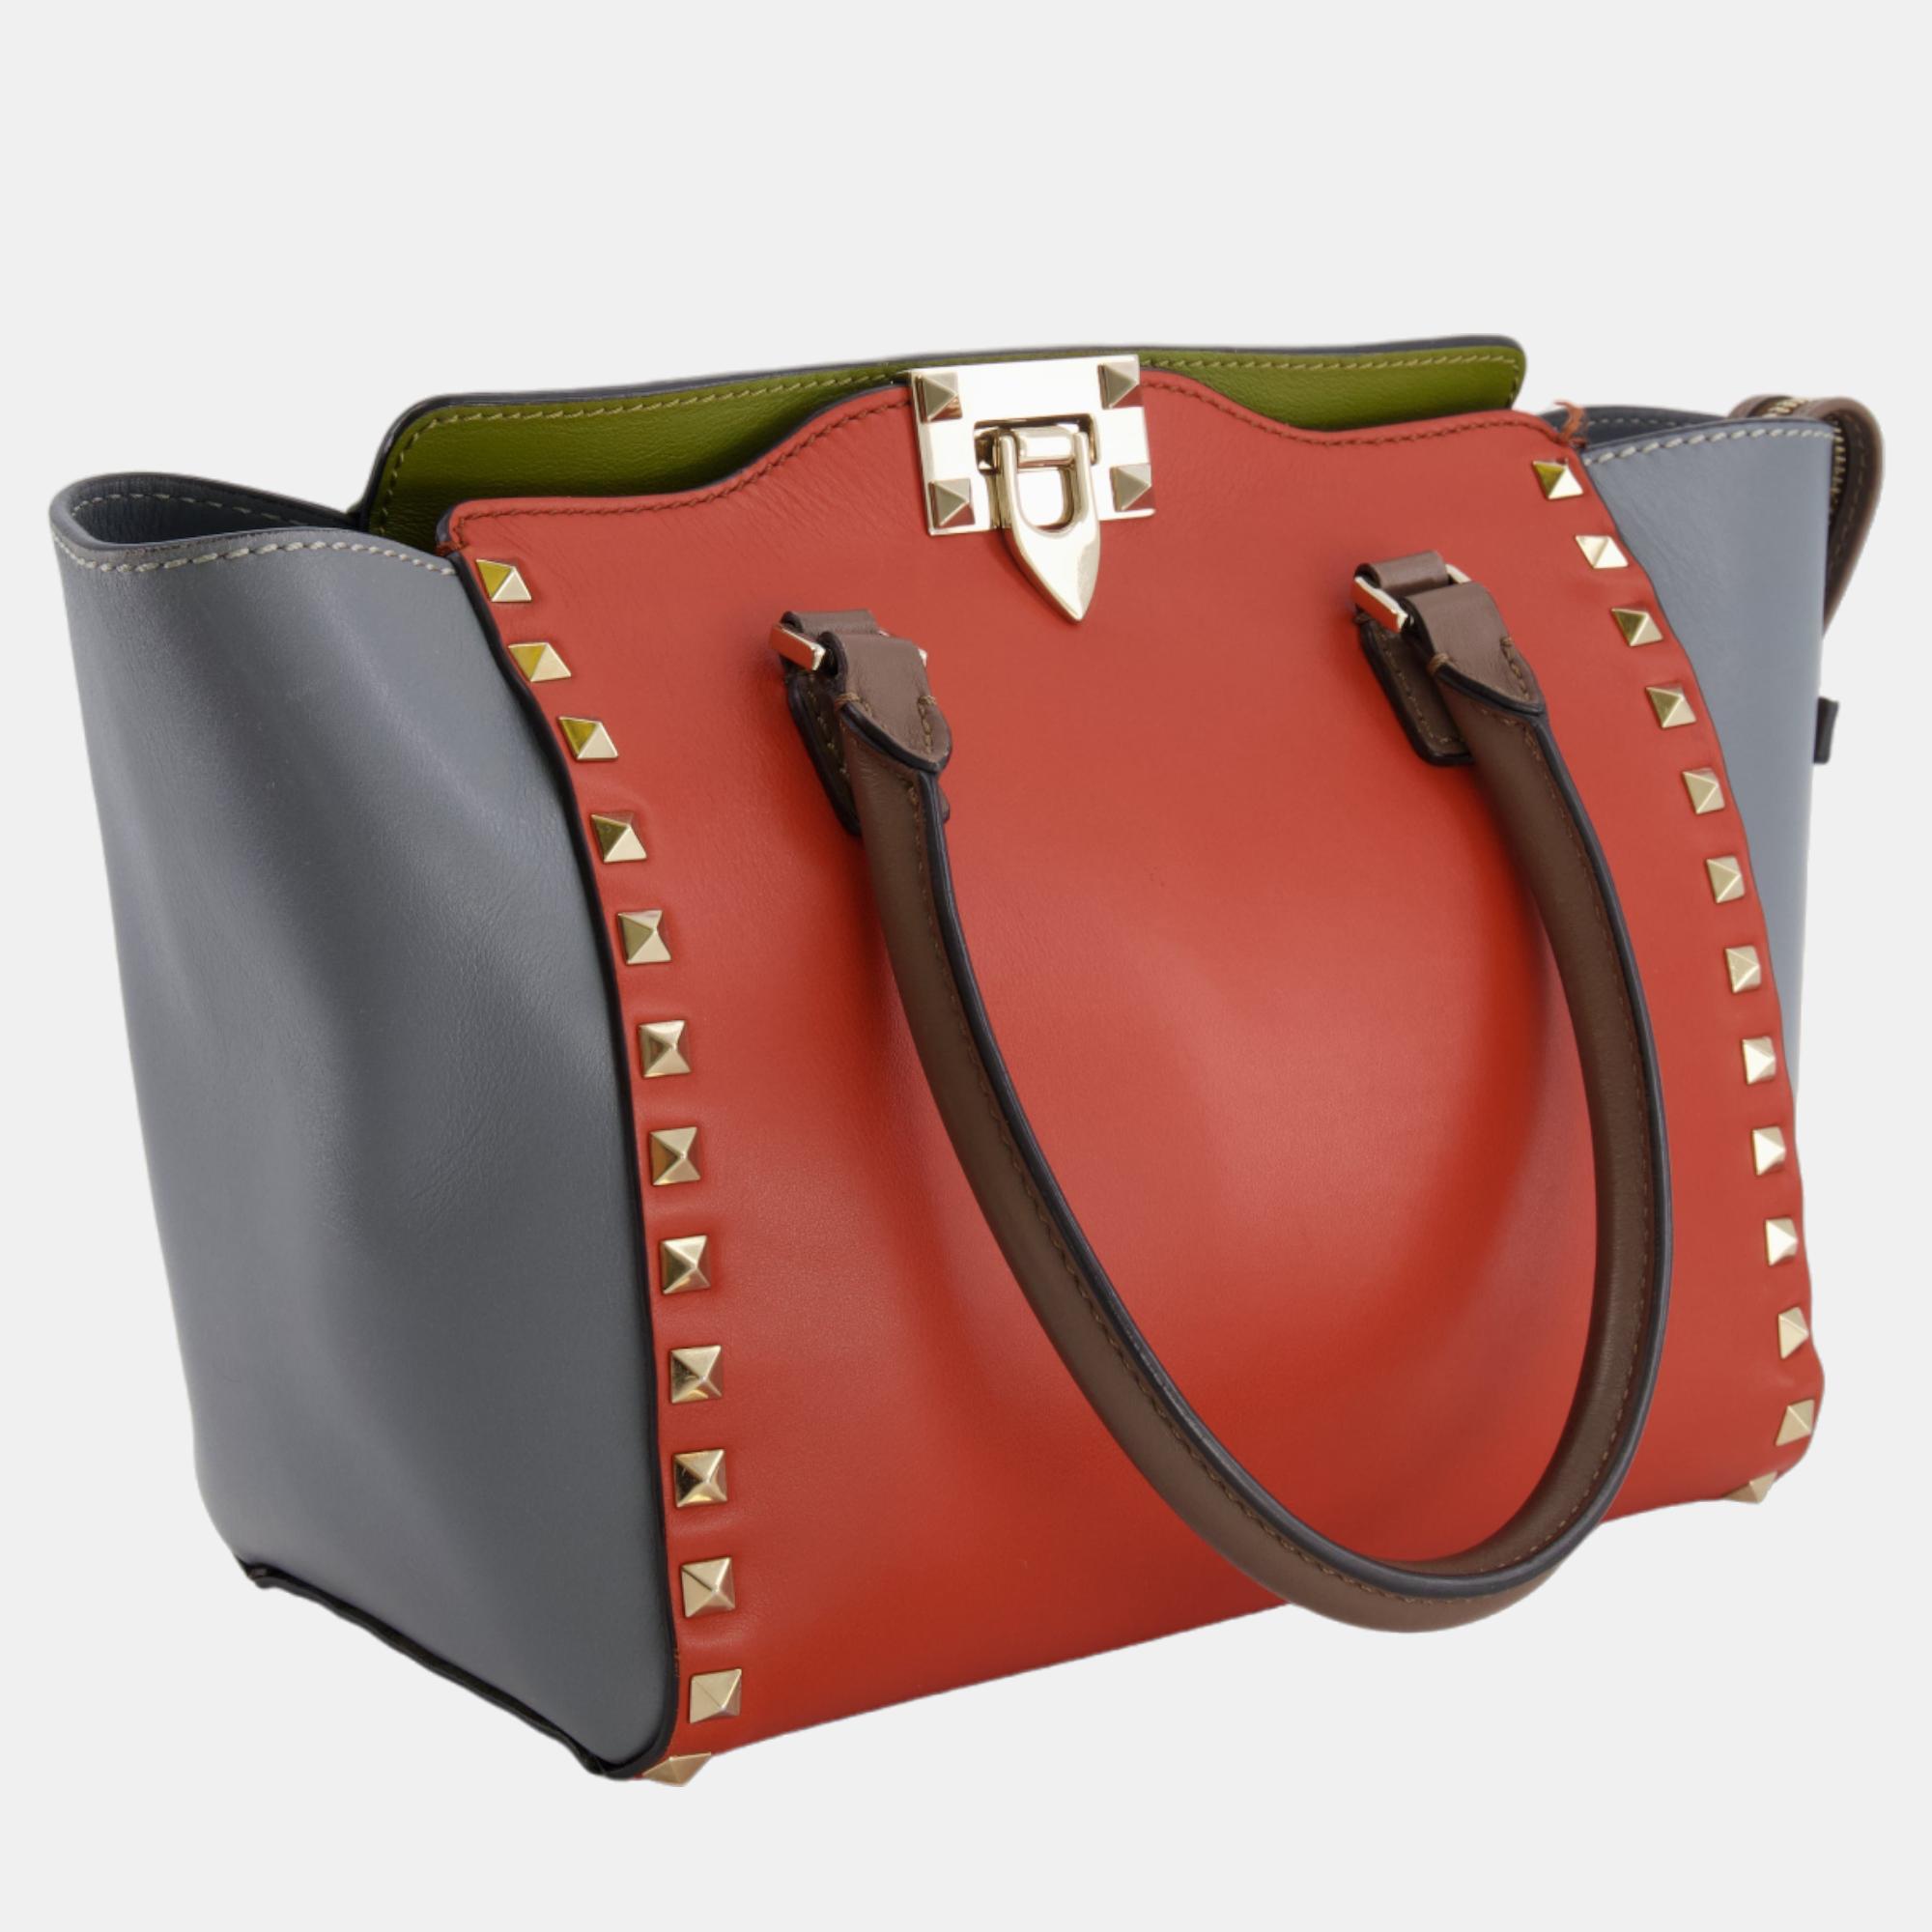 Valentino Grey, Orange And Green Rockstud Small Tote Bag With Champagne Gold Hardware